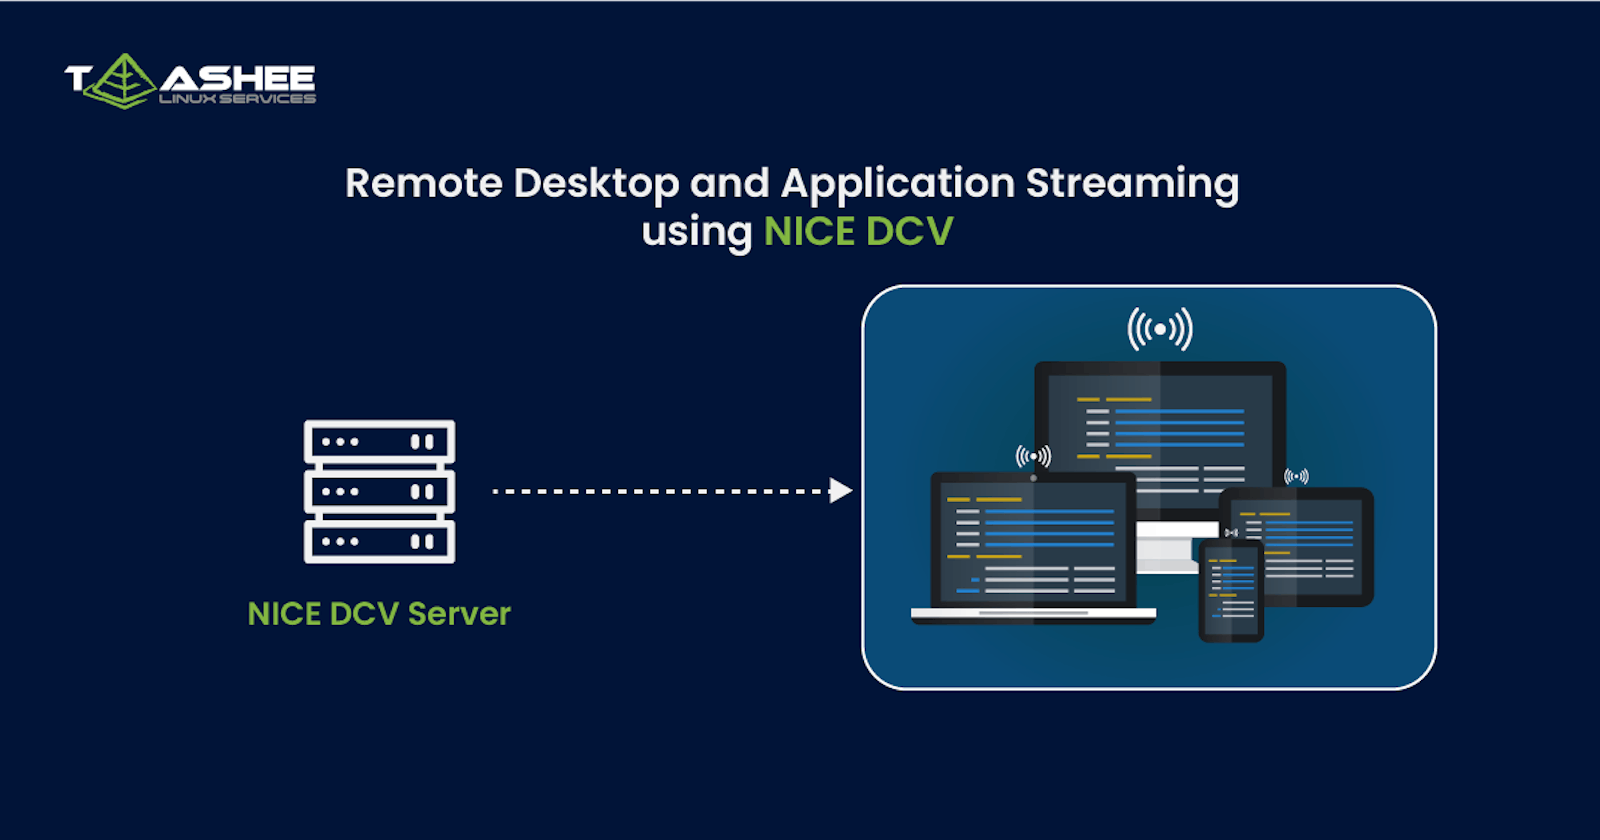 How To Stream Your Software Applications in HQ using NICE DCV aka AWS AppStream 2.0?